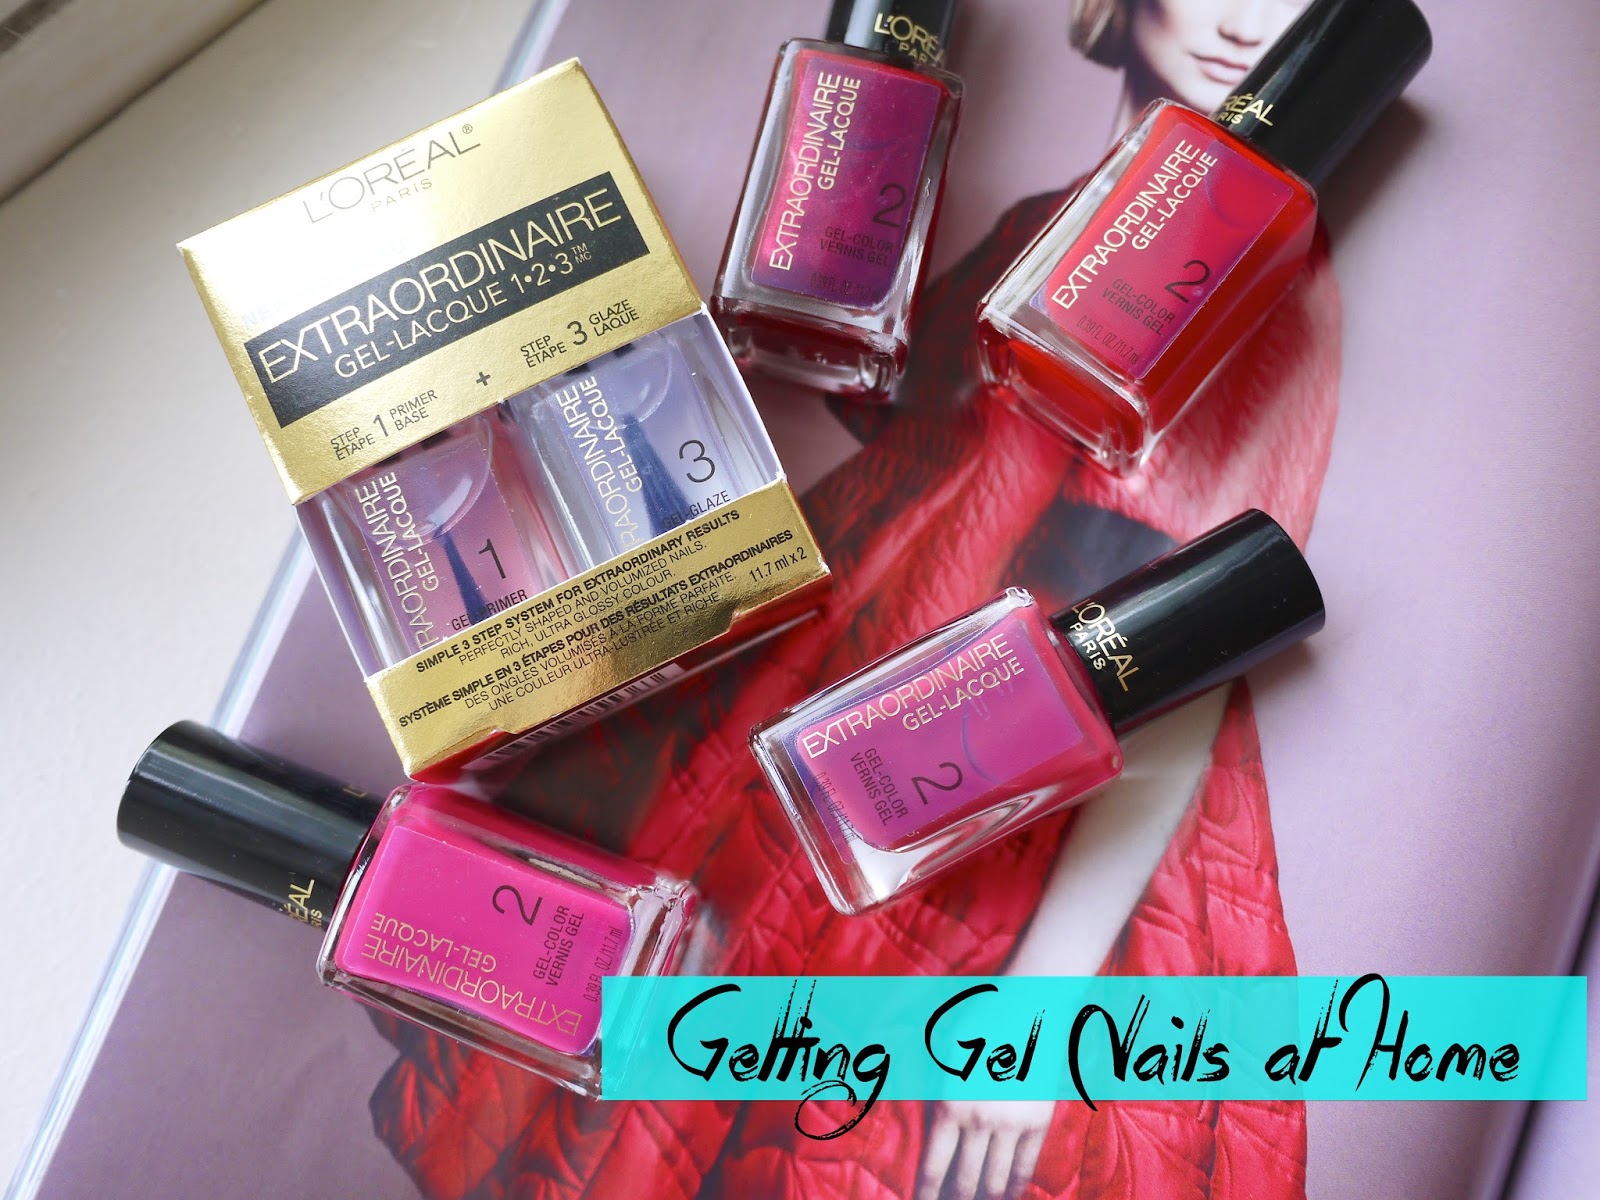 l'oreal extraordinaire gel-lacque 1-2-3 primer and glaze kit review swatch